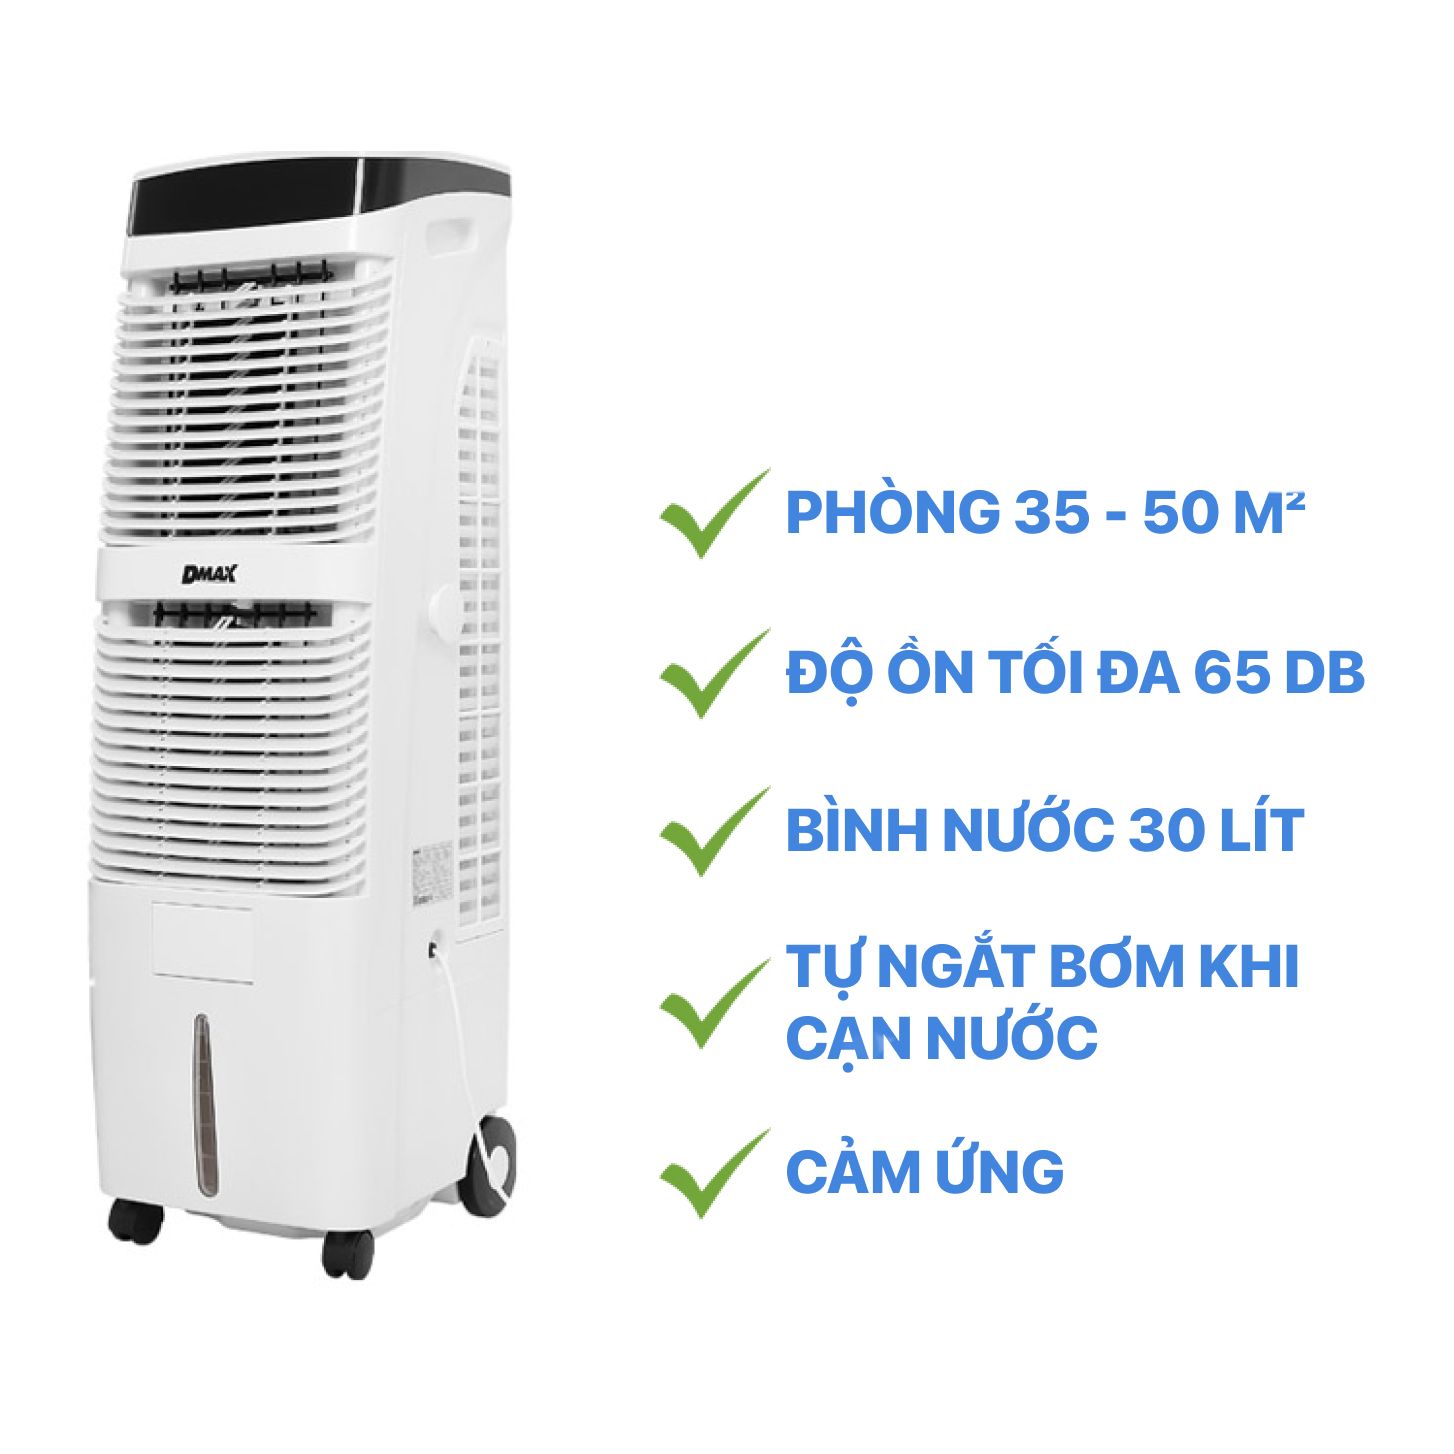 98% new arrival DMAX zlf-2804rc air conditioner fan cooling range 35